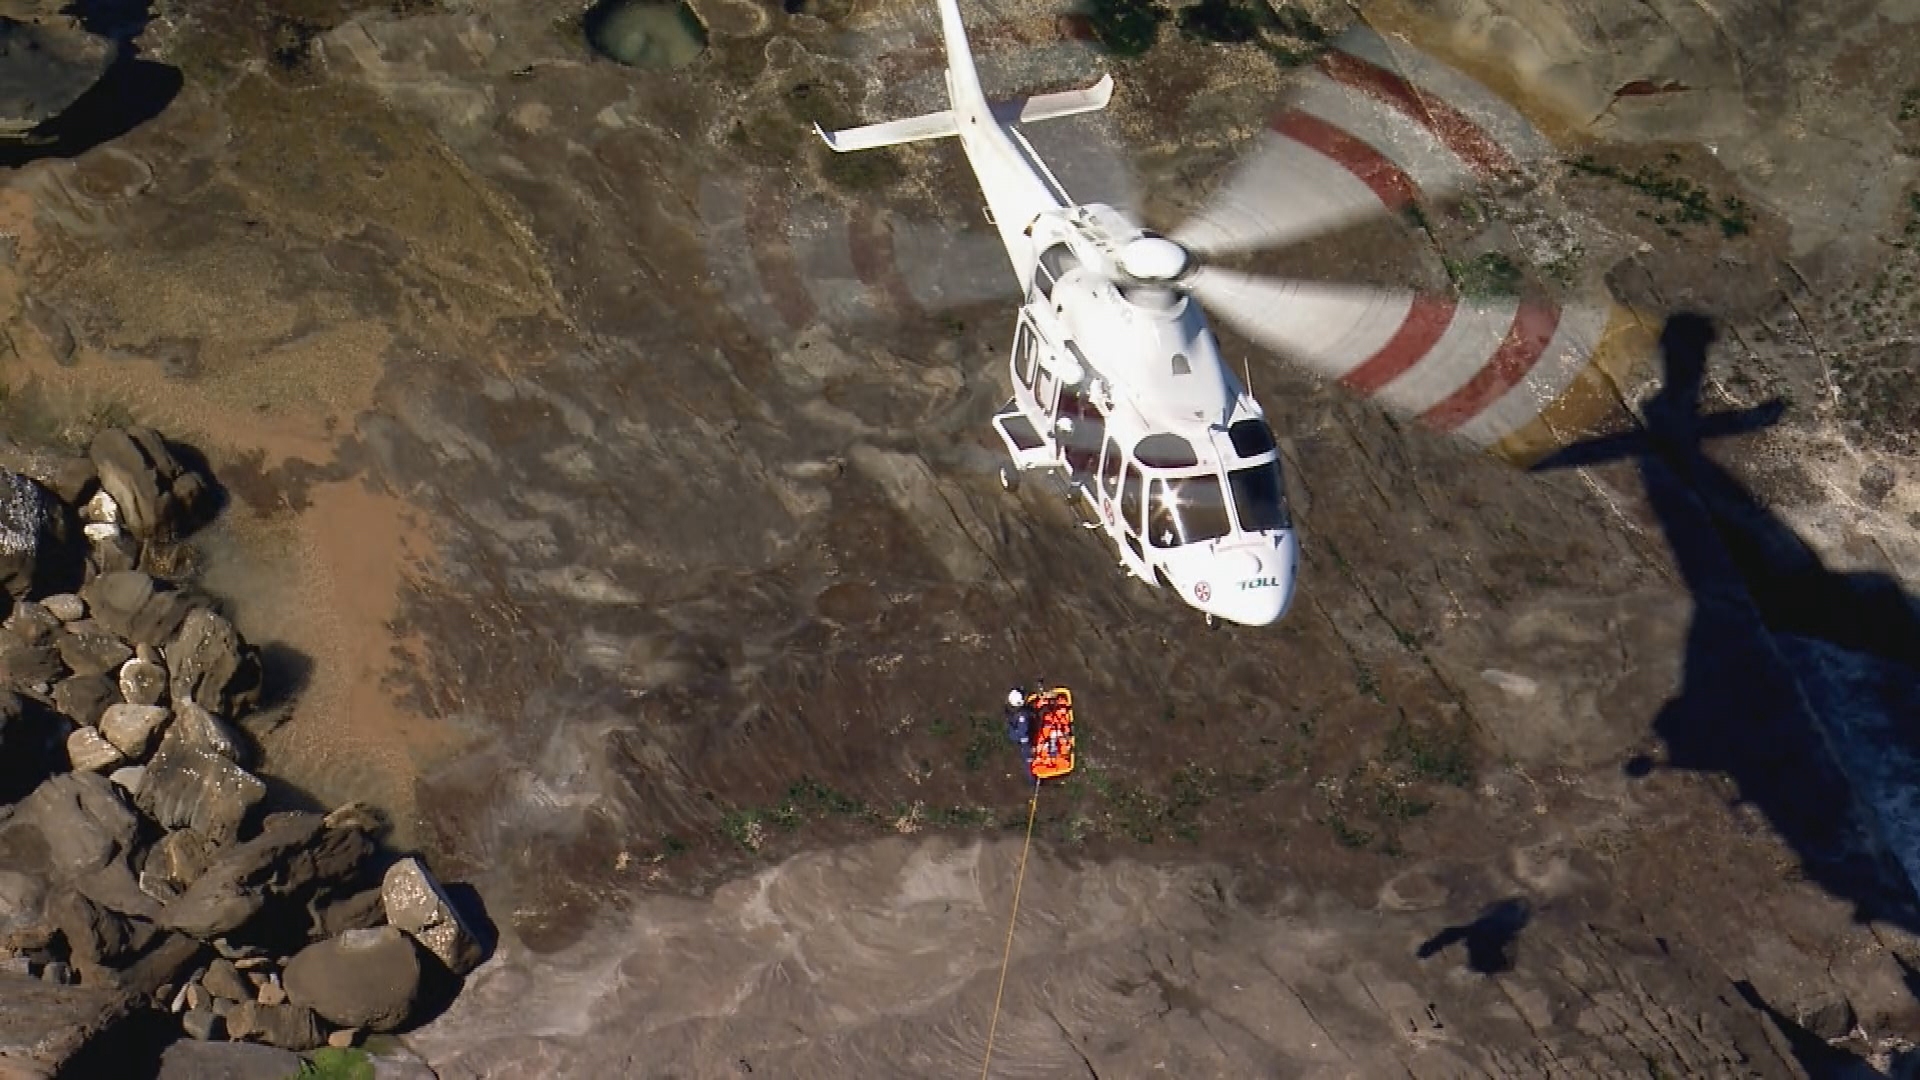 A woman has been rescued after being swept onto the rocks at Stanwell Park.